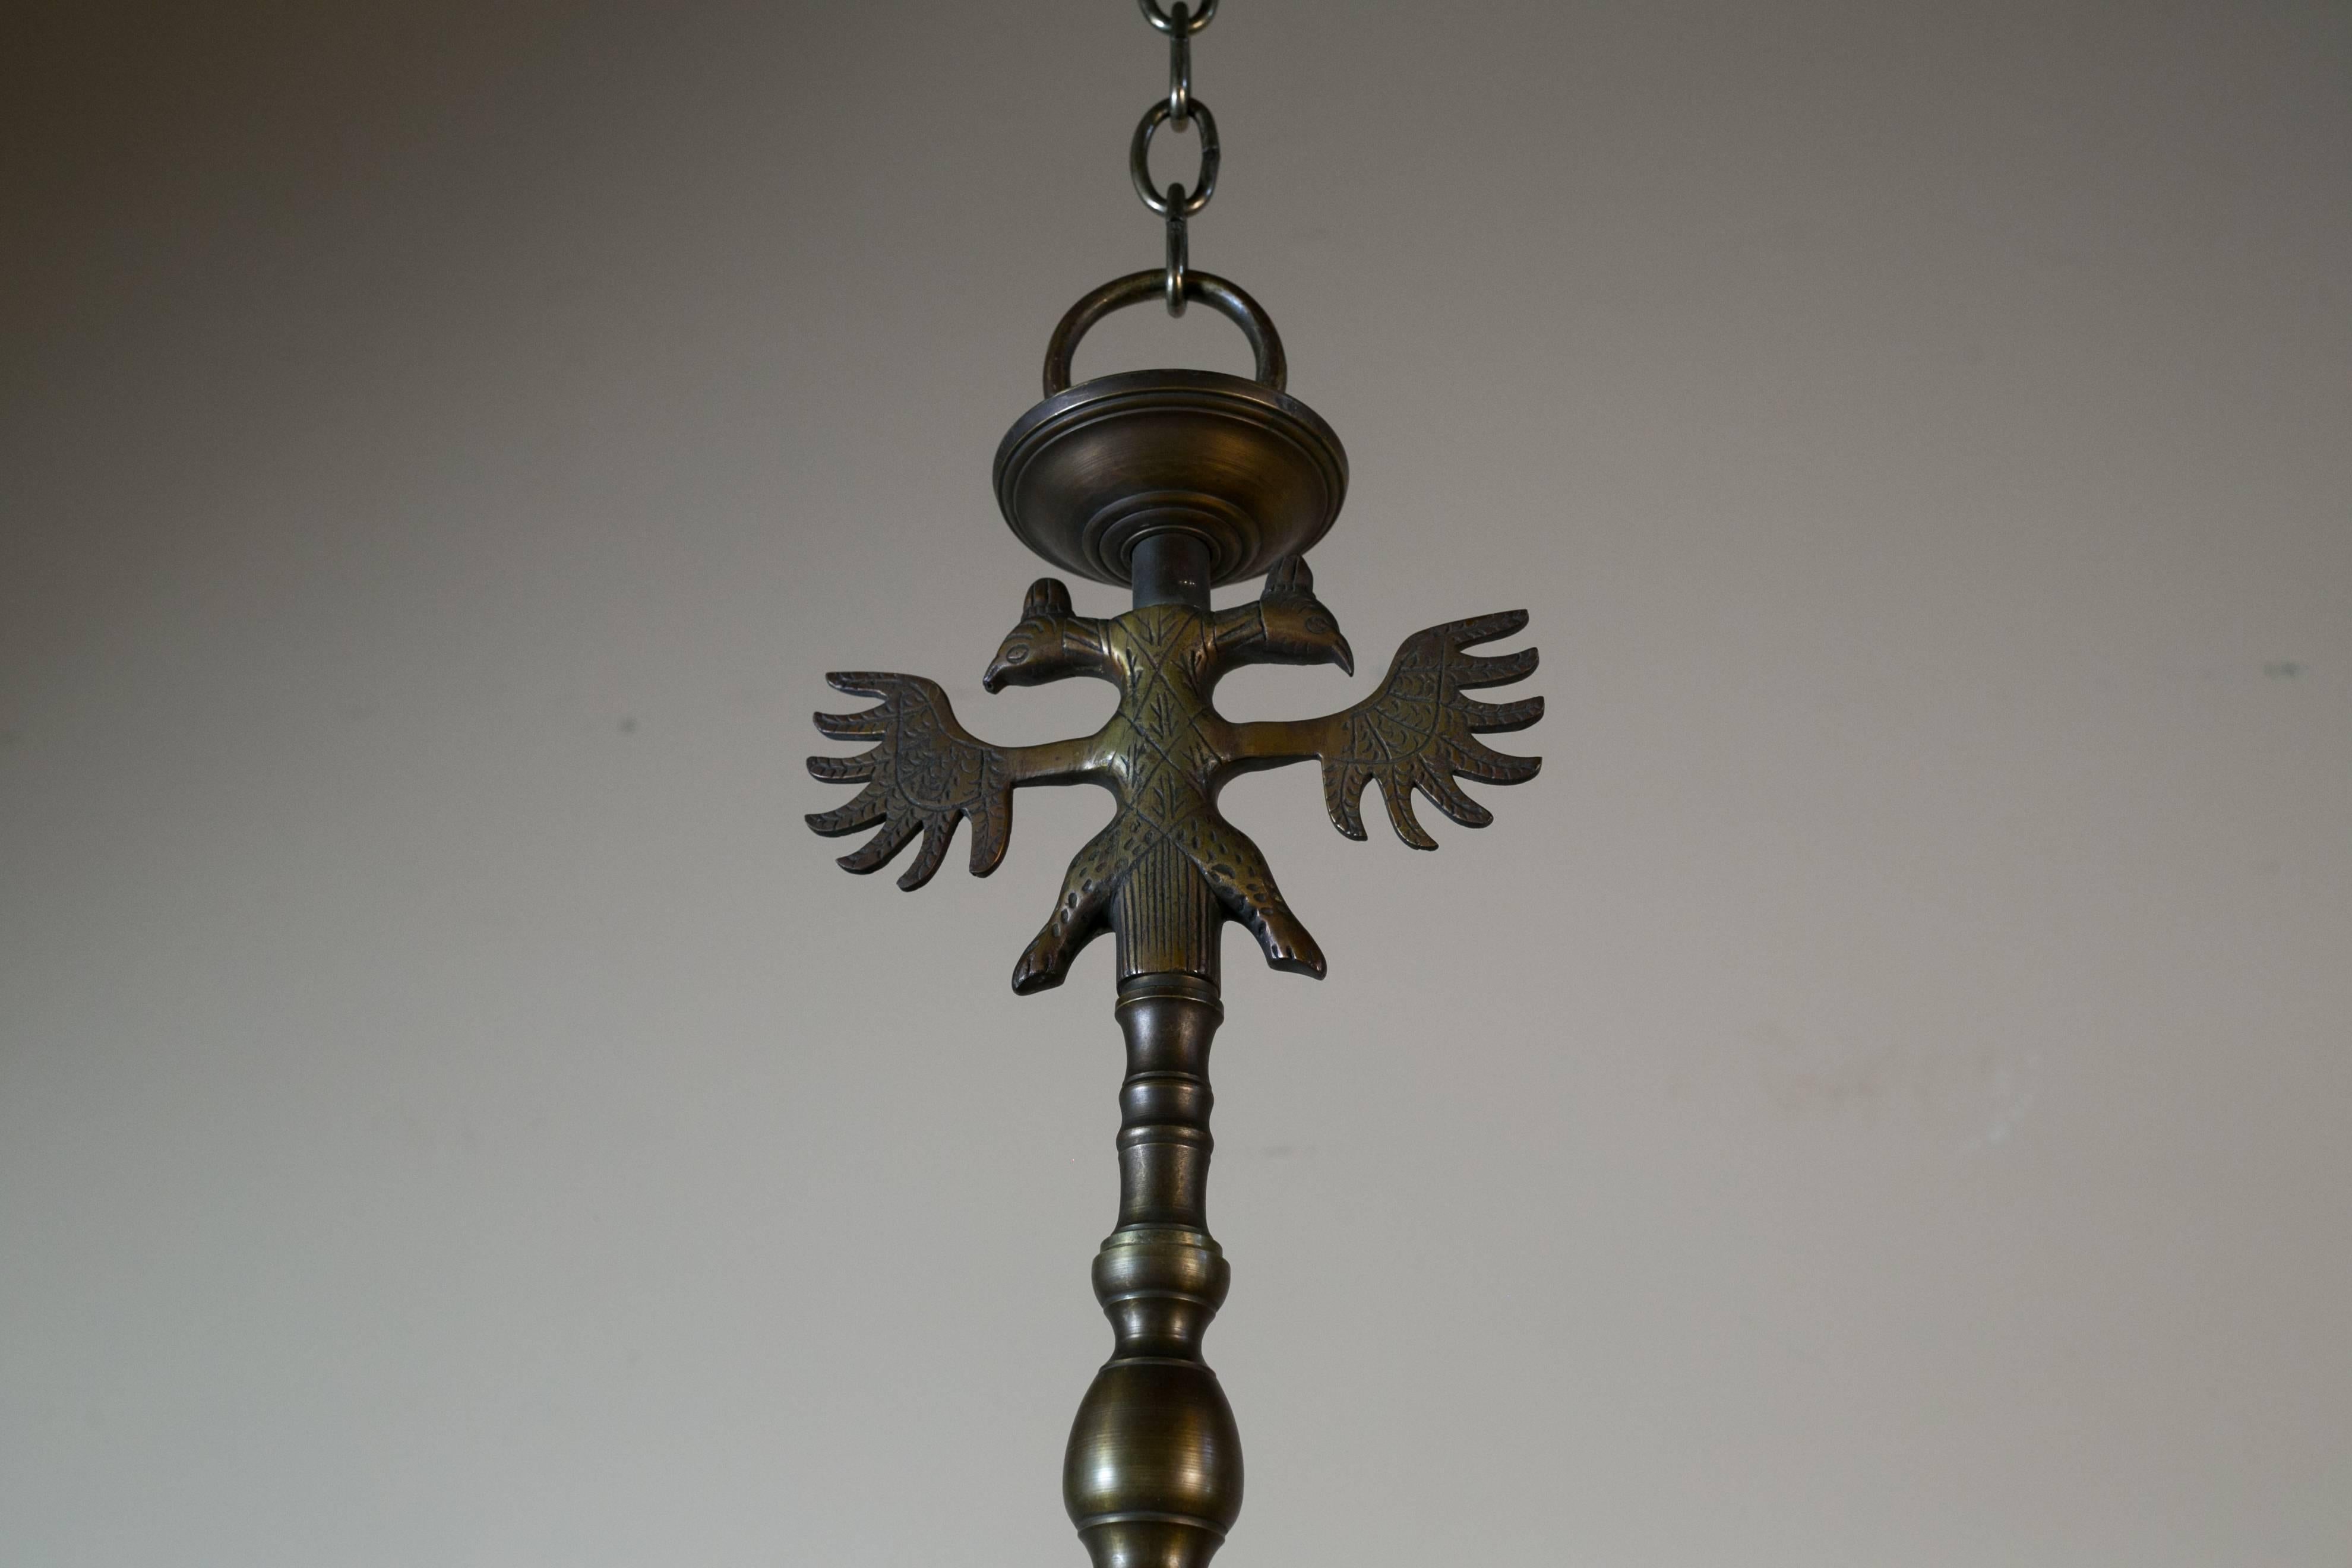 Vintage heavy bronze chandelier with eight arms from Belgium, circa 1940. Features a double headed eagle at the top and stylized faces on the arms. Beautiful patina on the bronze and a Classic, timeless design. Unusual features like the flat dolphin